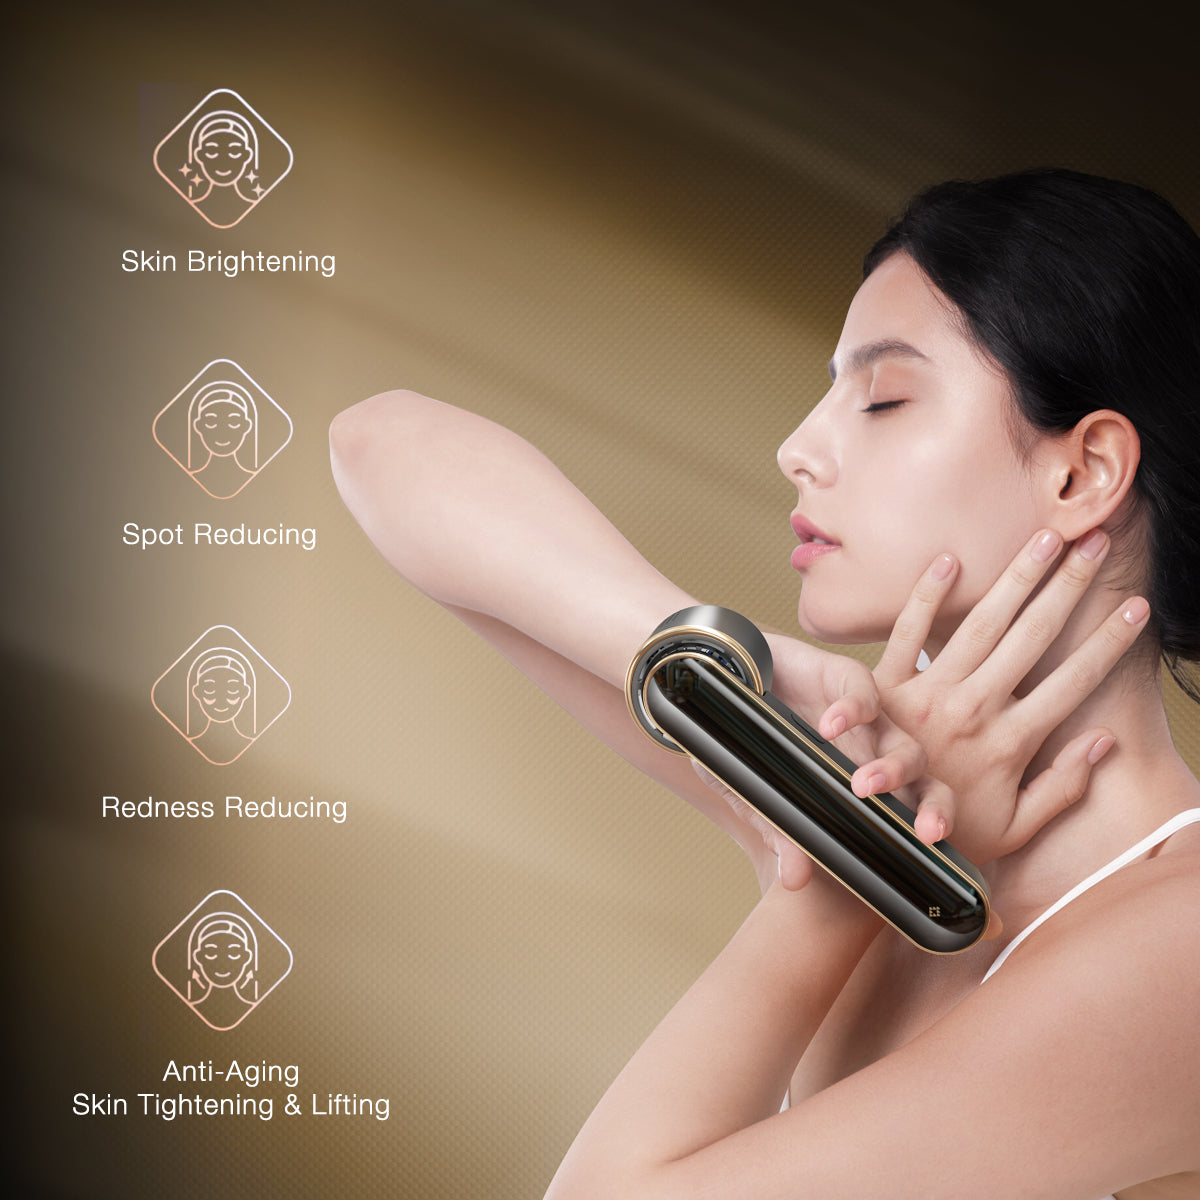 Woman receiving skin brightening and anti-aging treatment with JOVS Blacken DPL Photorejuvenation Device, enhancing skin texture and reducing redness.